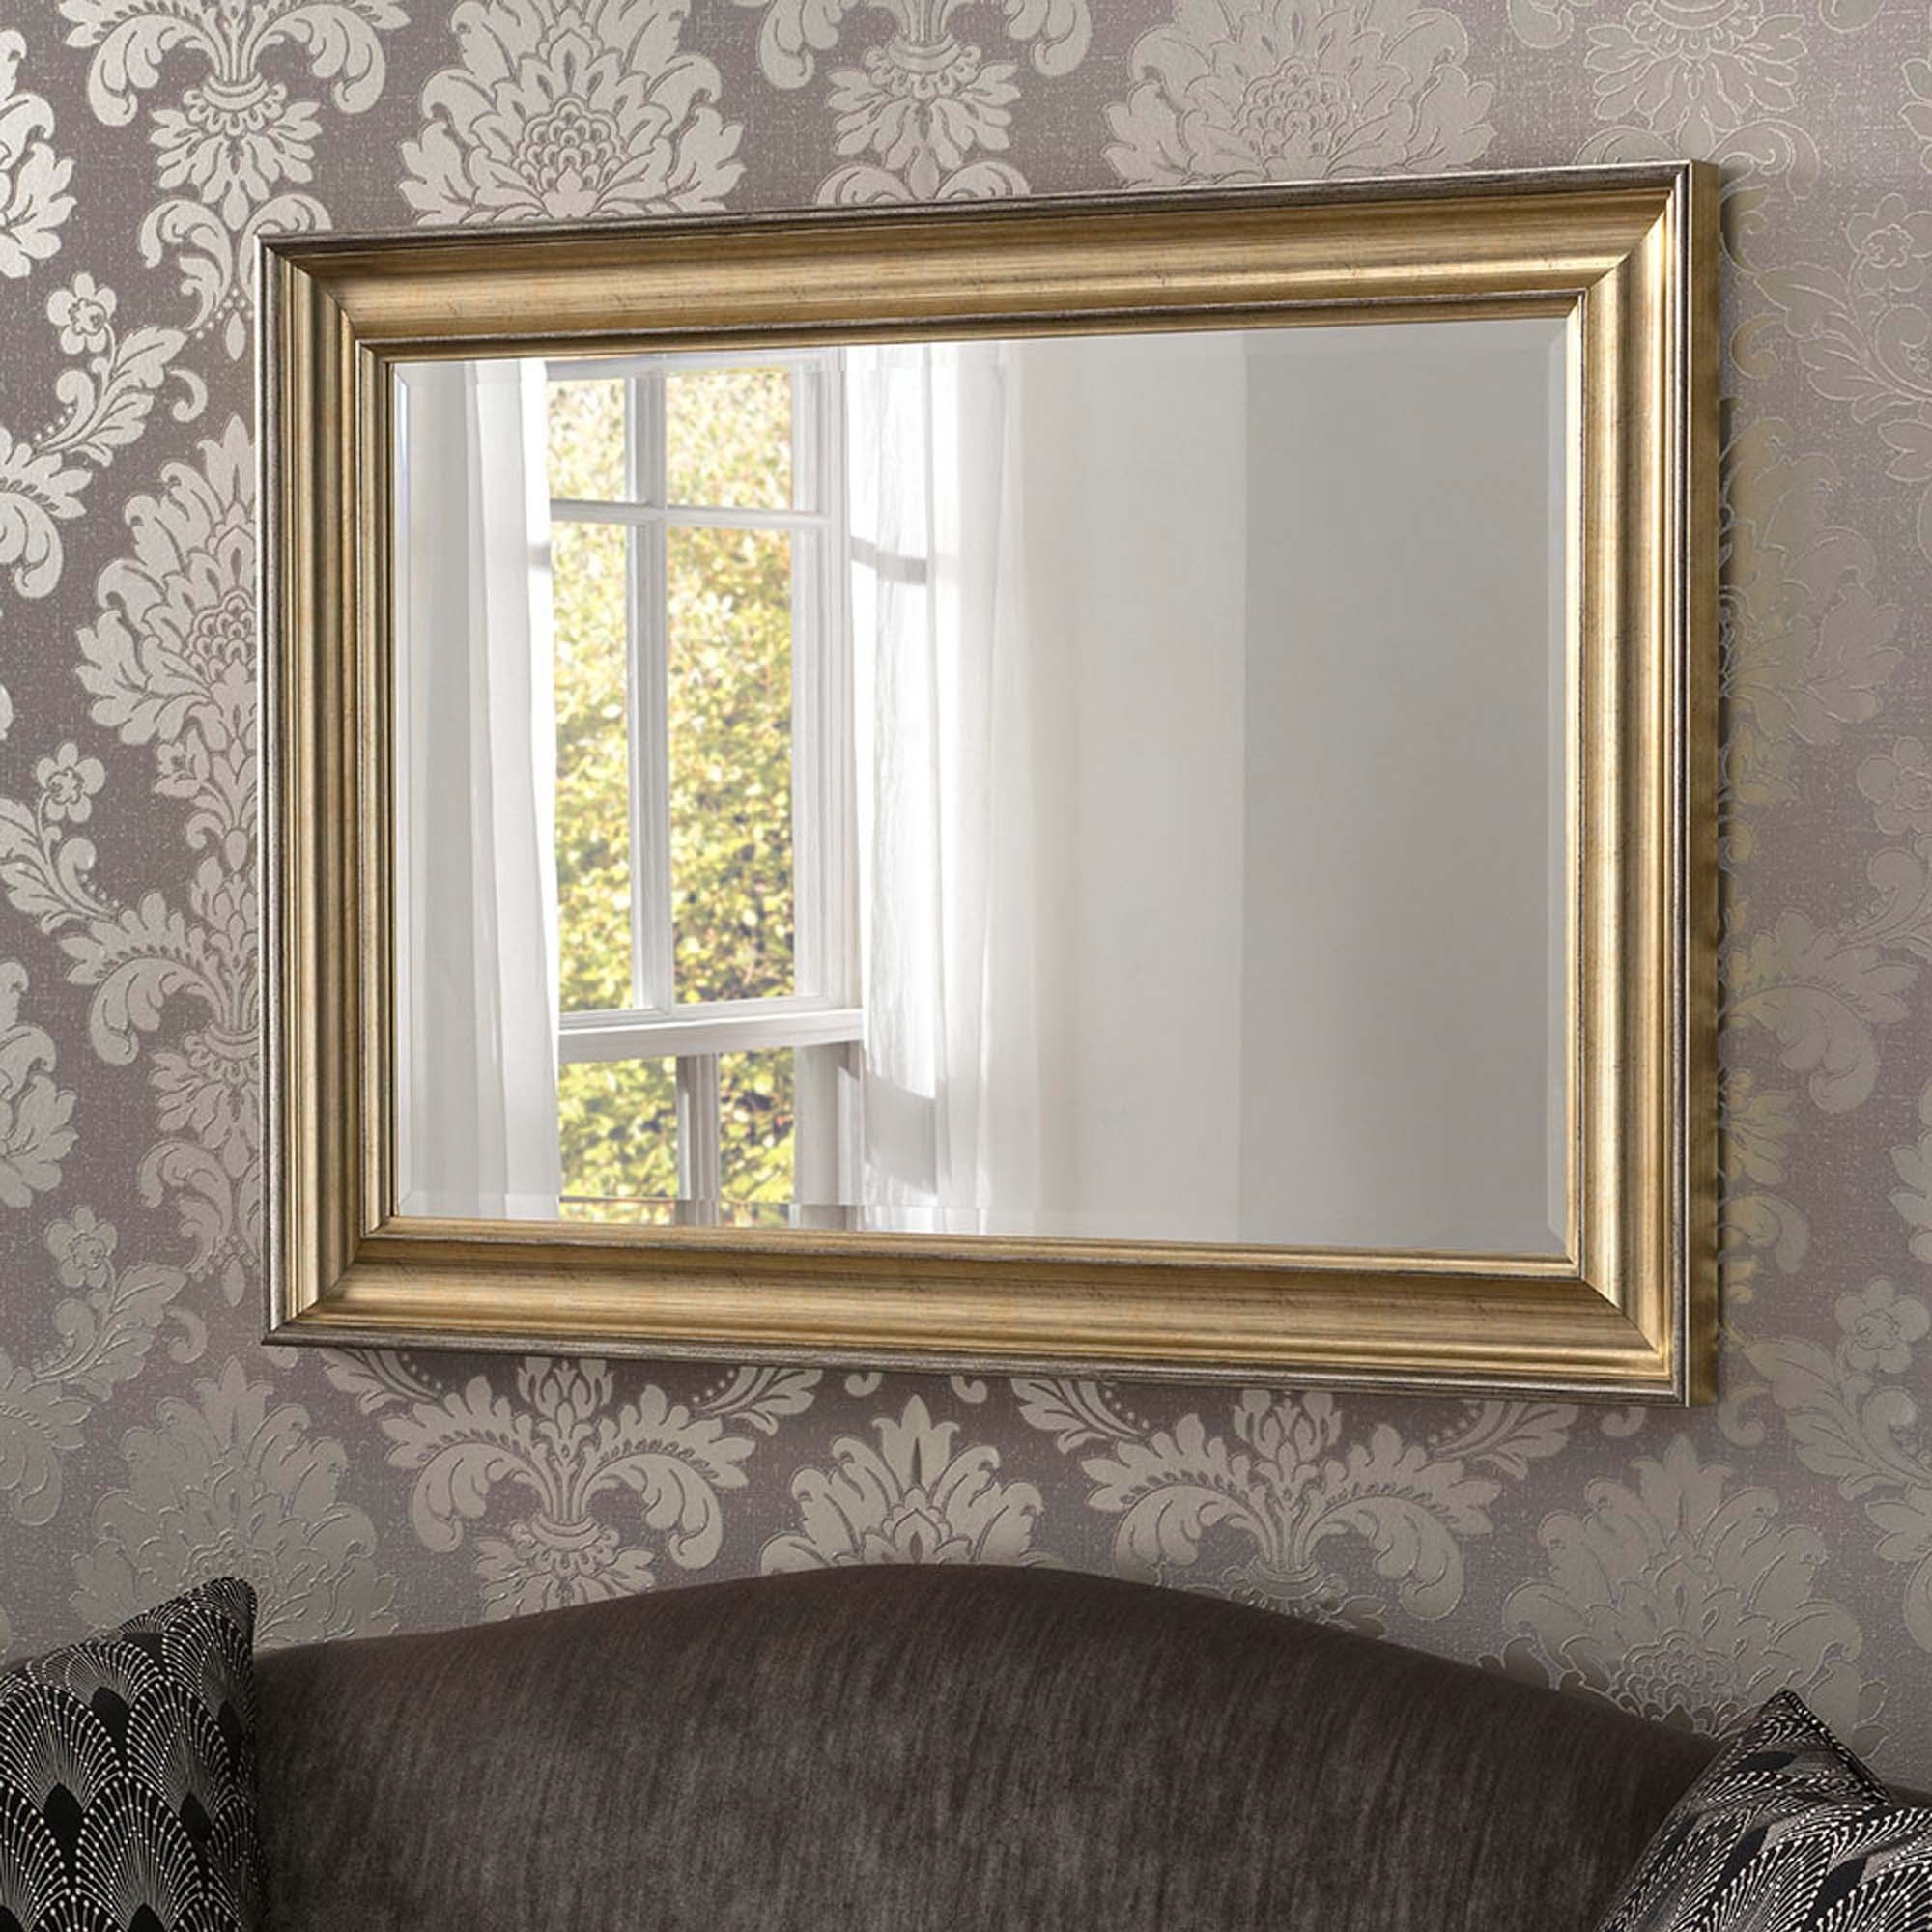 Decorative Champagne Rectangular Wall Mirror | Decorative Mirrors Pertaining To Rectangle Accent Mirrors (View 5 of 15)